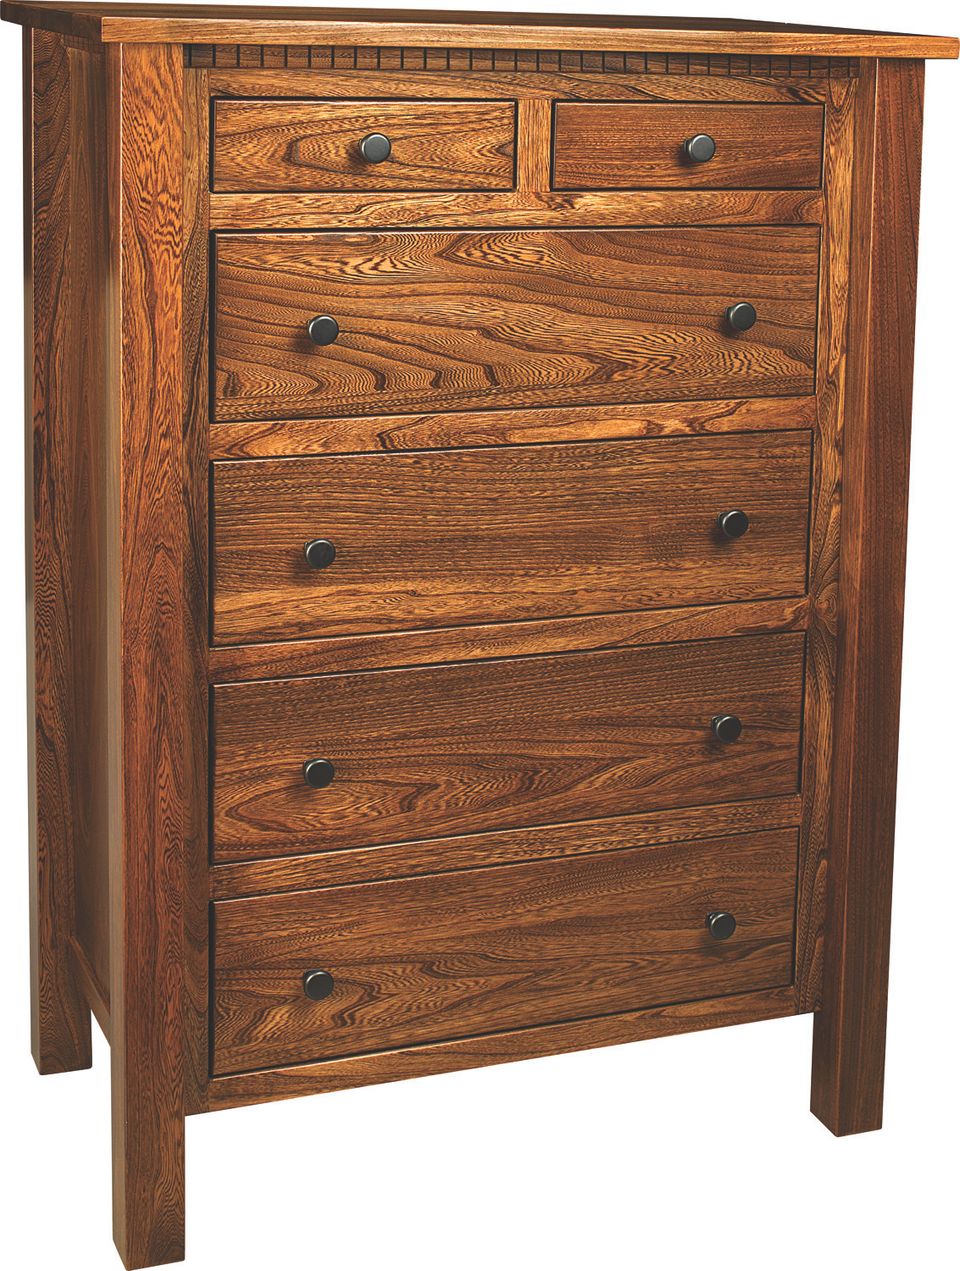 Fw lindholt chest of drawers